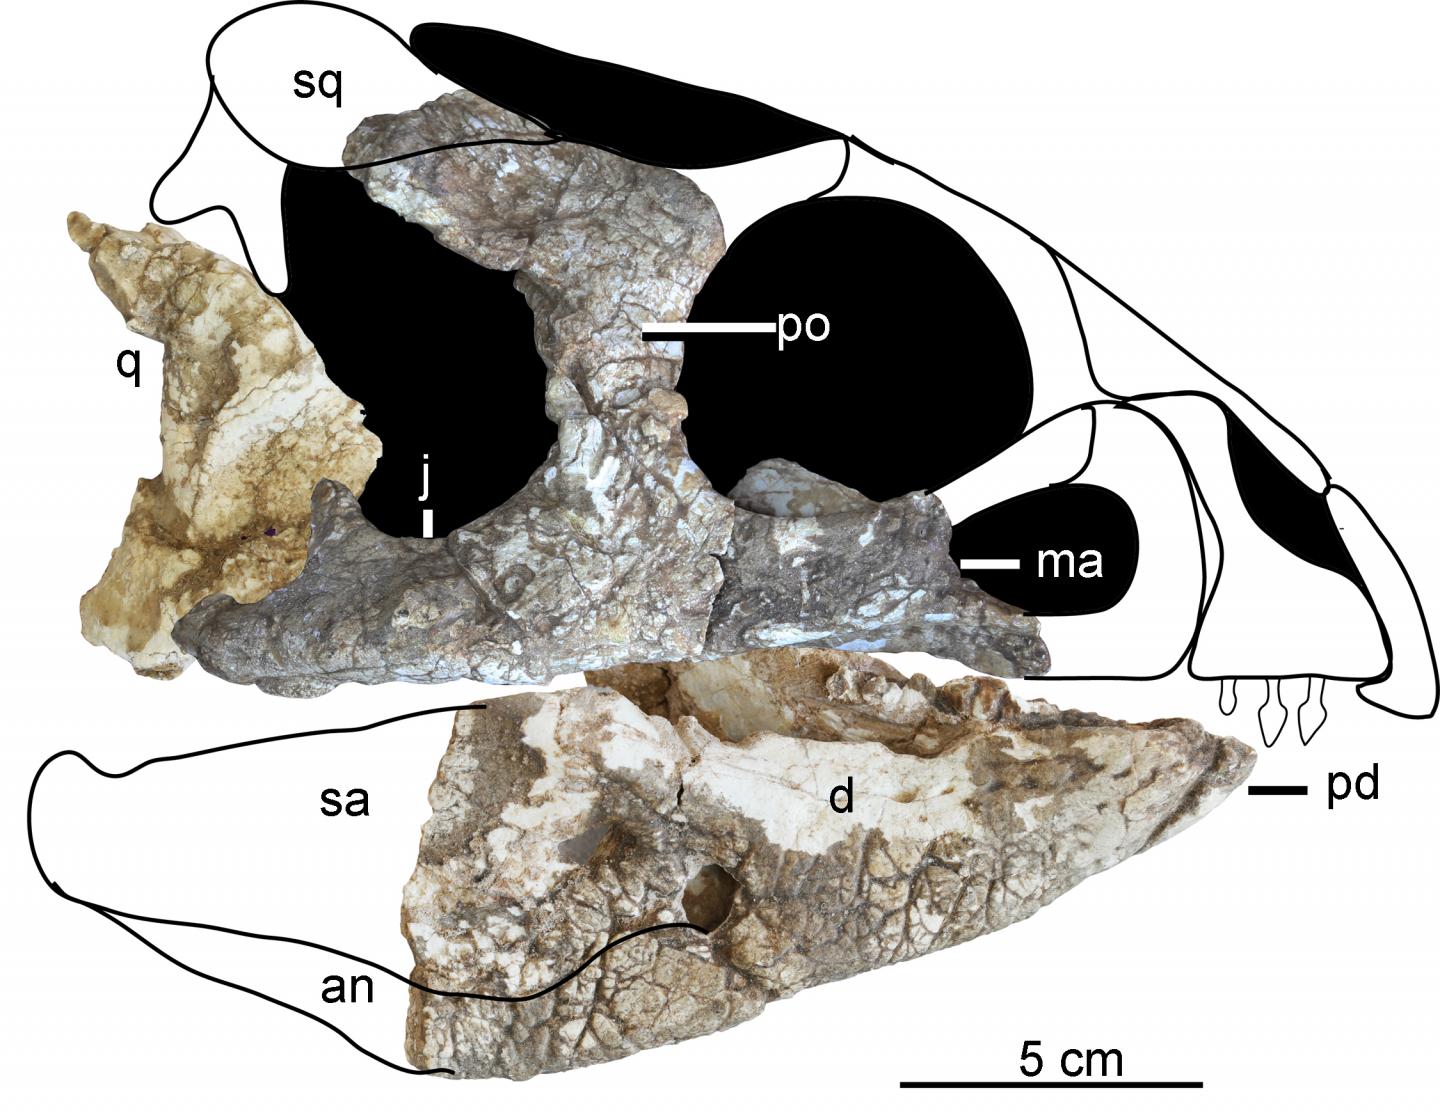 'Ornamental' Faced Ceratopsian Found in China (1 of 2)